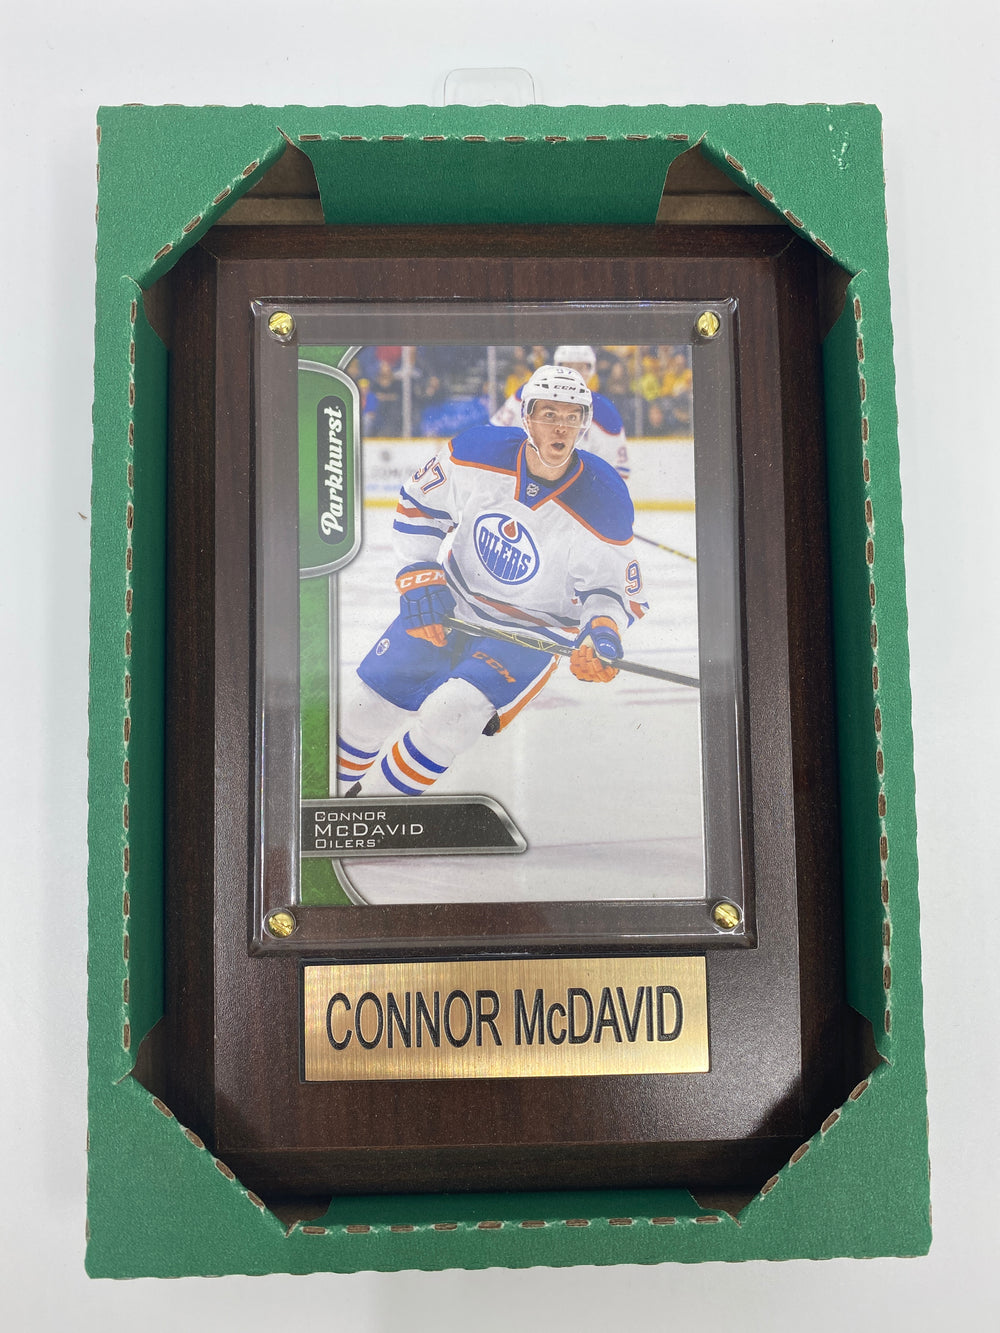 NHL Plaque with card 4x6 Connor McDavid